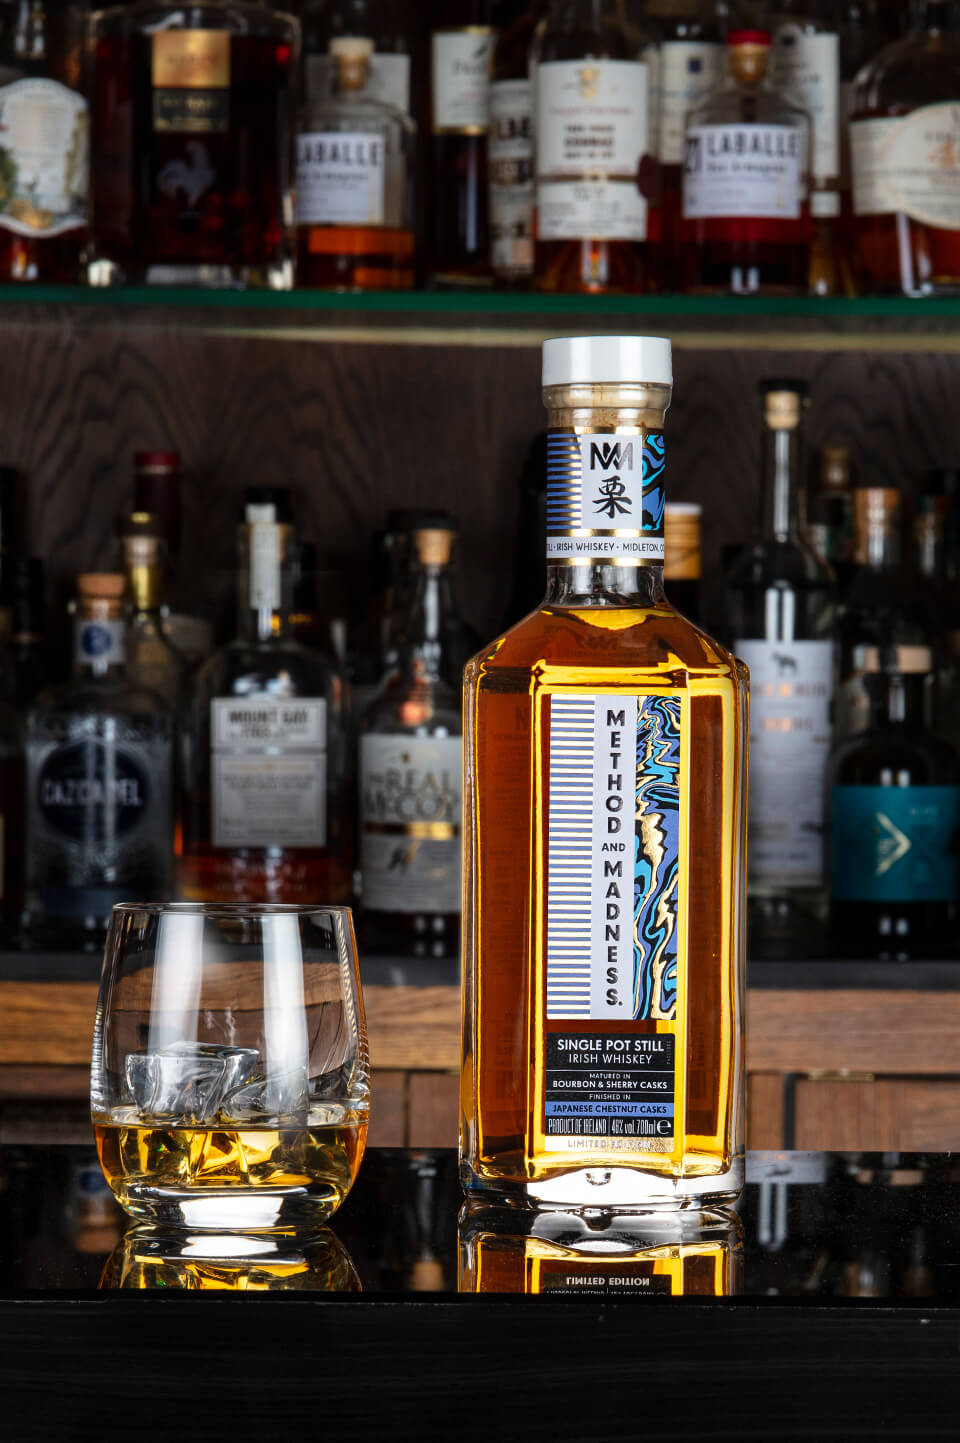 Method and Madness Japanese Chestnut Cask Finish